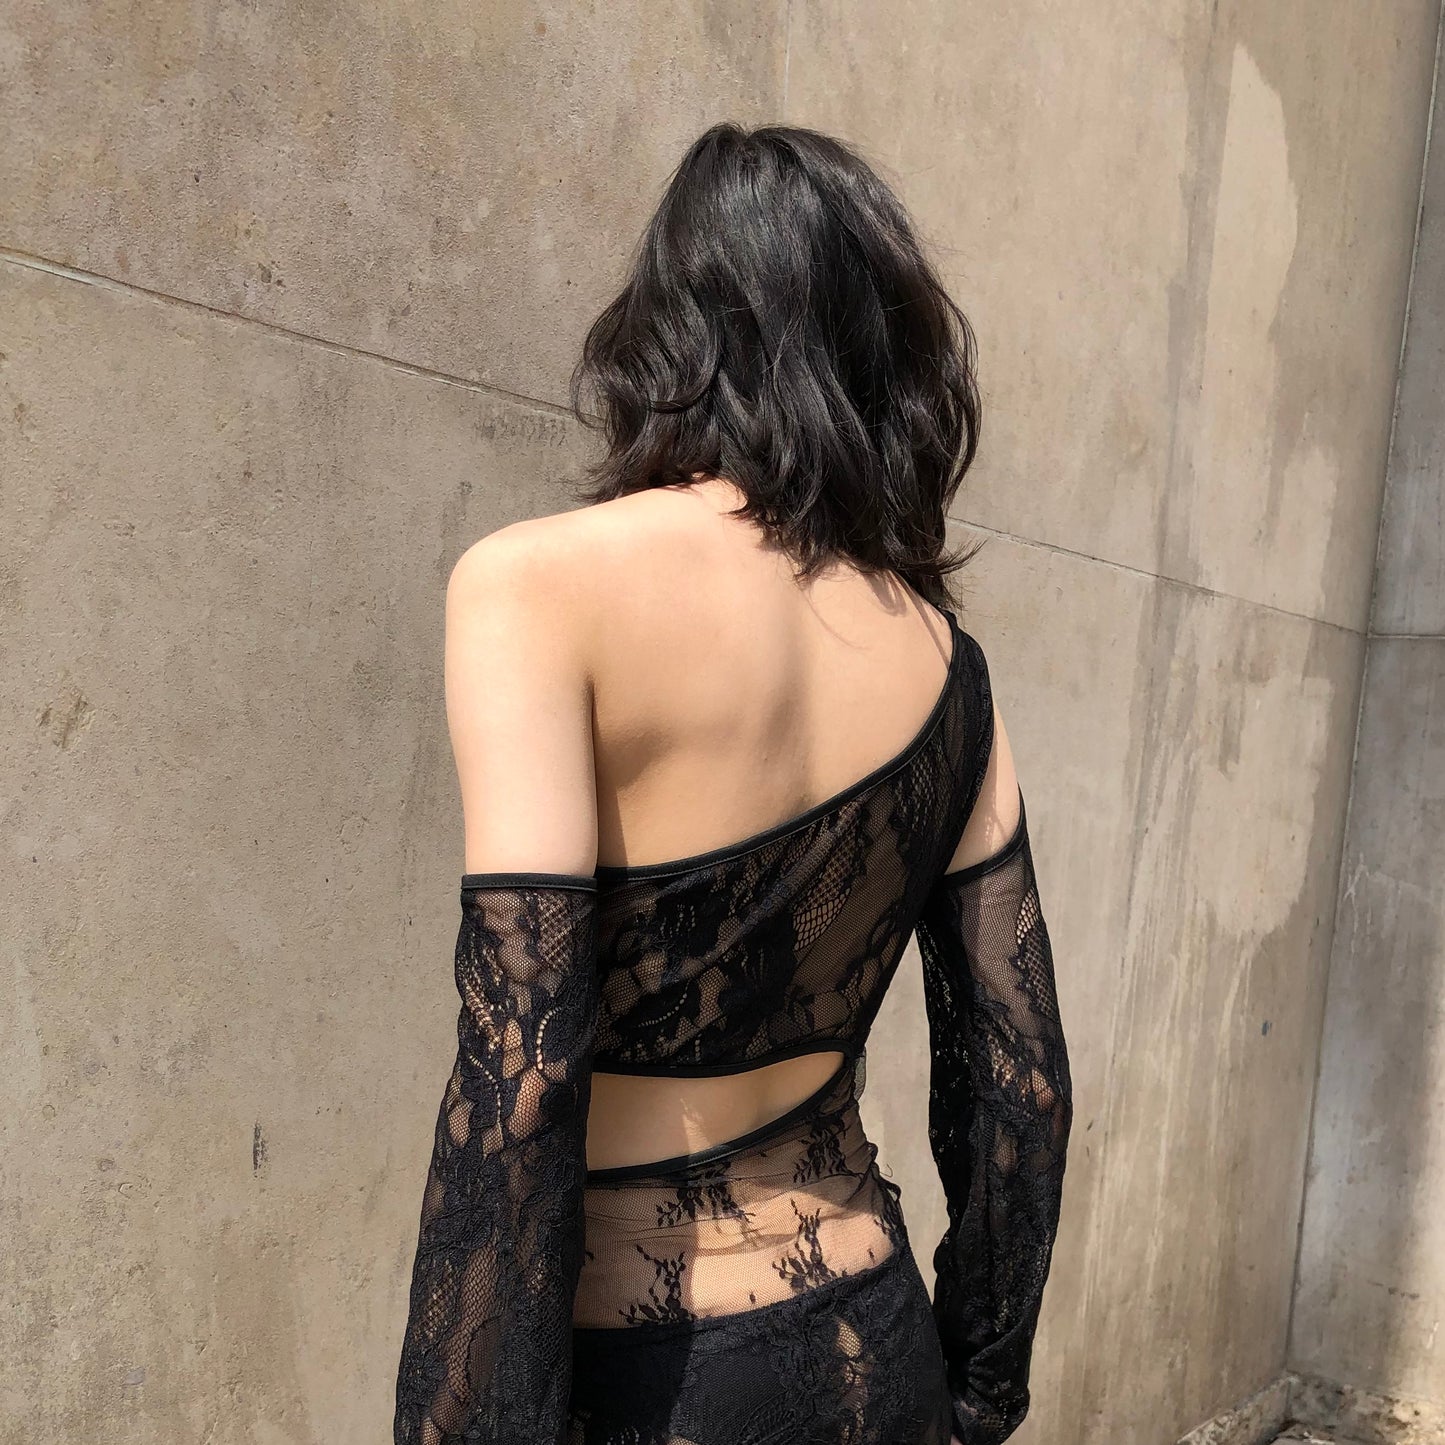 Captivating product image featuring a black lace mini dress by Eastern Underwear, an exquisite Parisian brand. This sultry mini dress showcases intricate lacework, embodying the brand's signature blend of sophistication and allure for an unforgettable lingerie experience.